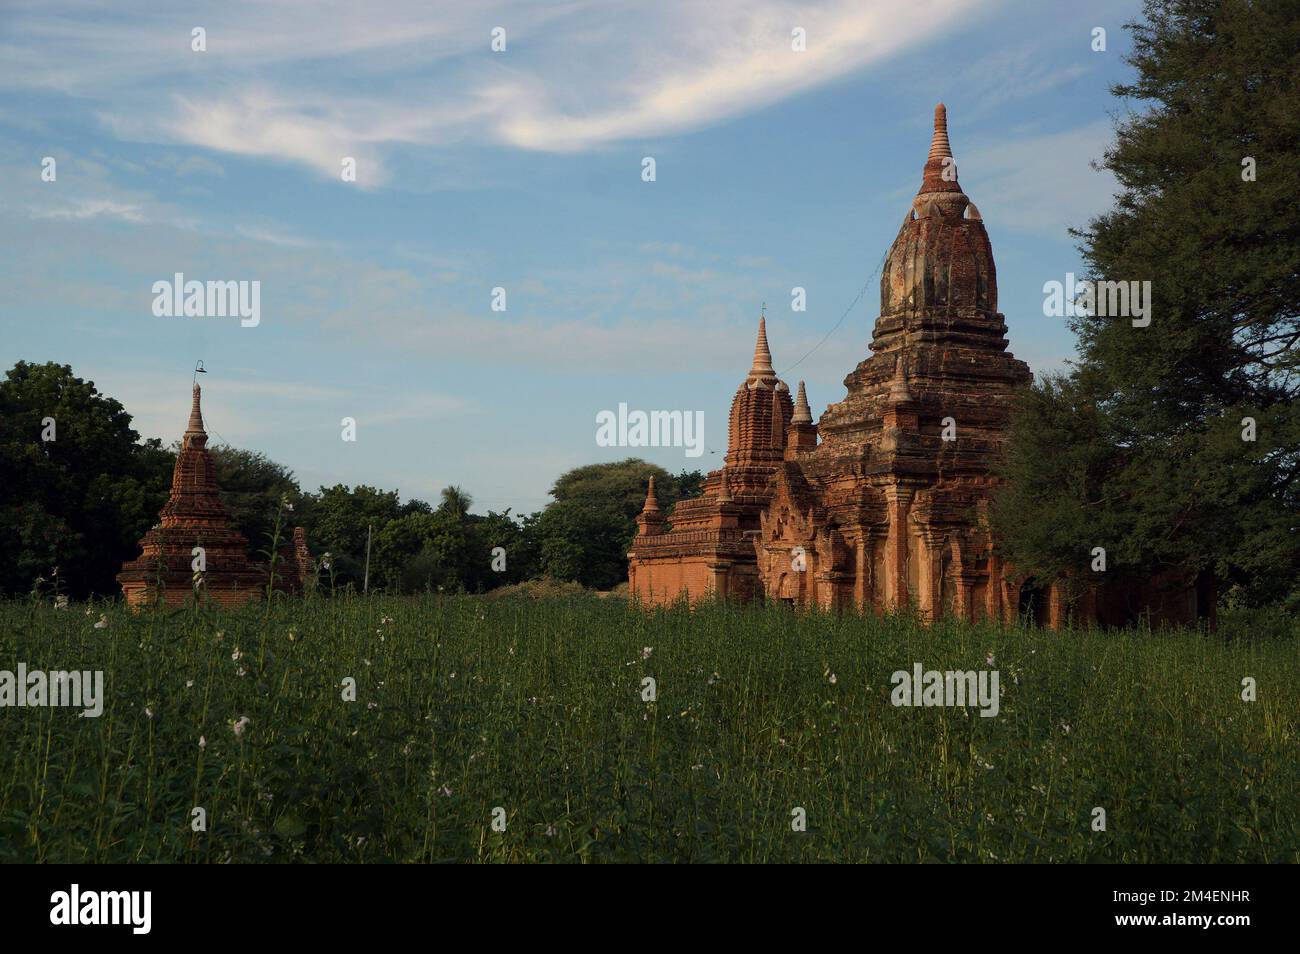 Three of the hundreds of temples in the walled ancient city of Bagan in Myanmar. Stock Photo